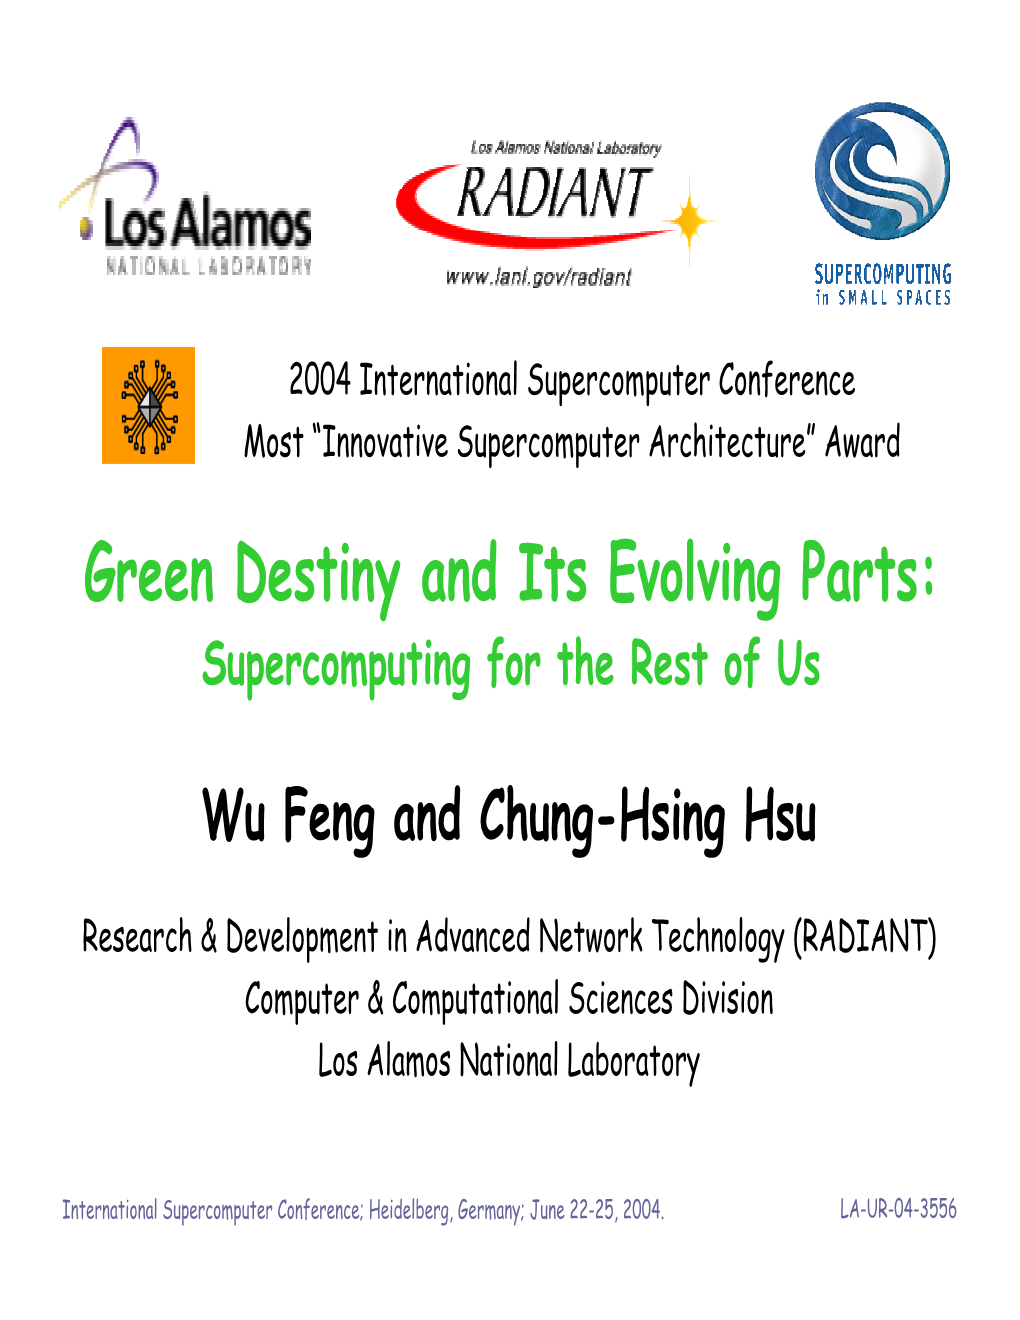 Green Destiny and Its Evolving Parts: Supercomputing for the Rest of Us